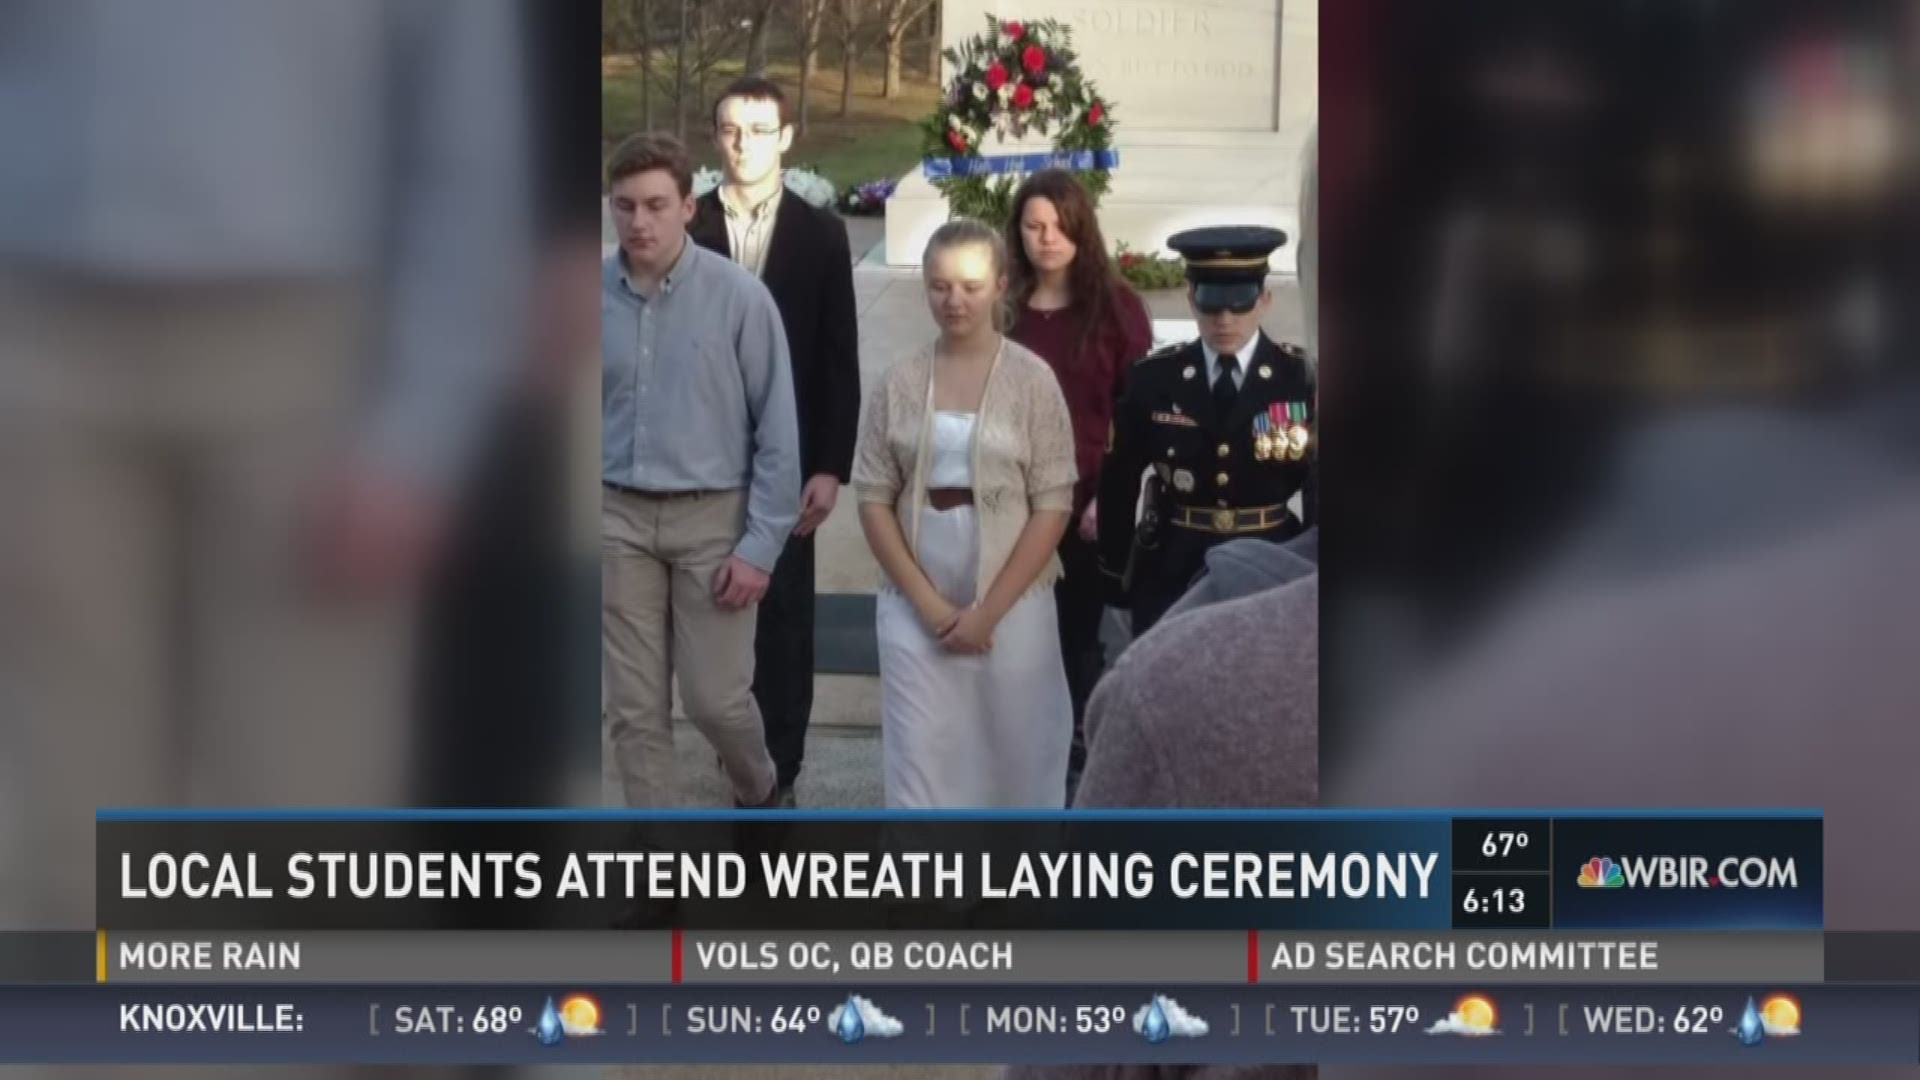 Jan. 20, 2017: East Tennessee students paid their respects to those buried at Arlington National Cemetery by taking place in a wreath laying ceremony at the Tomb of the Unknown Soldier.